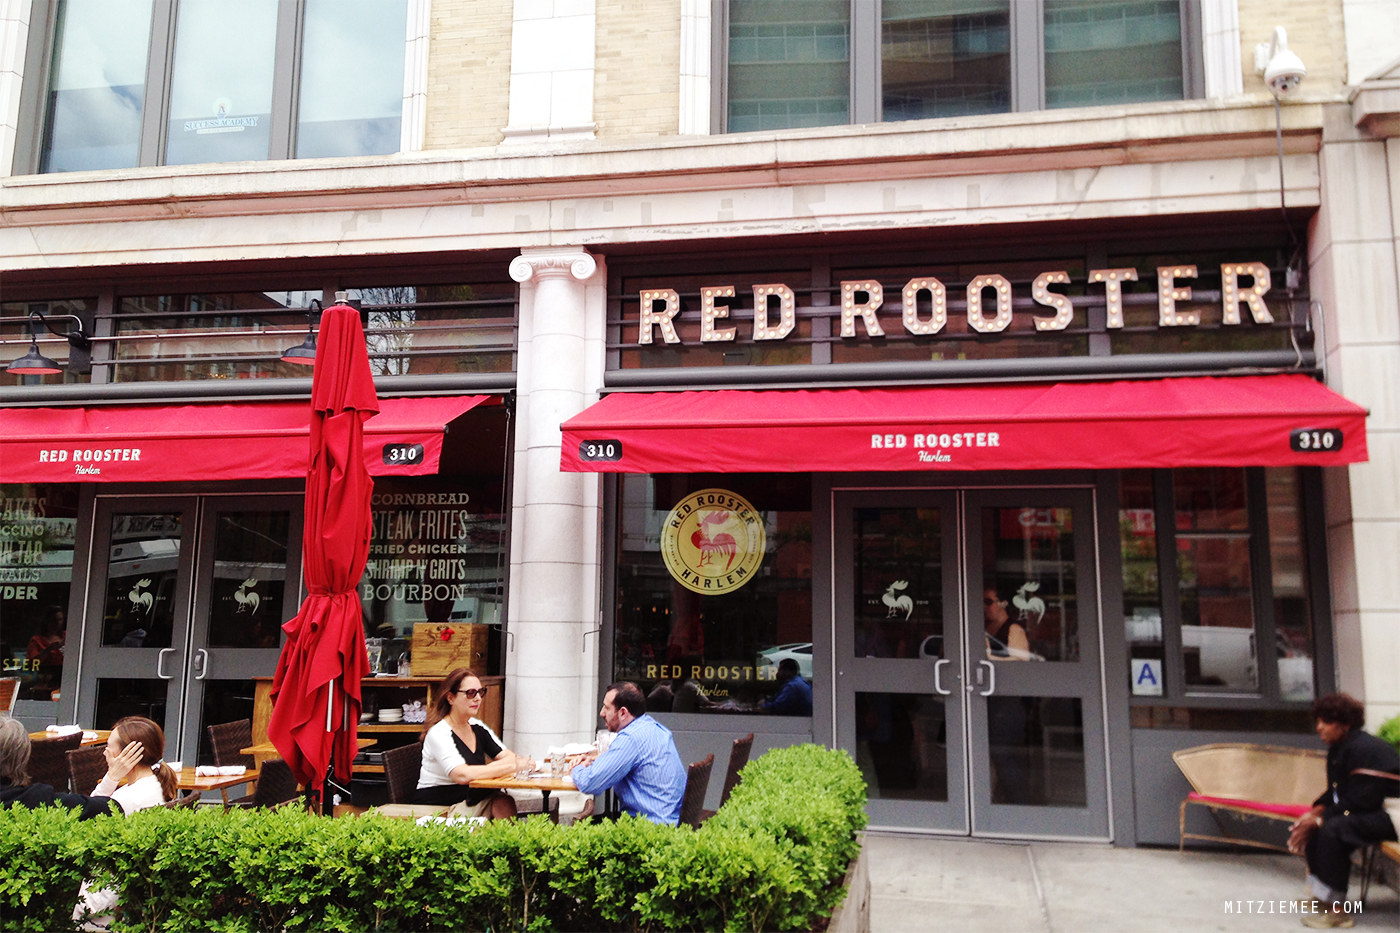 Red Rooster in Harlem, New York